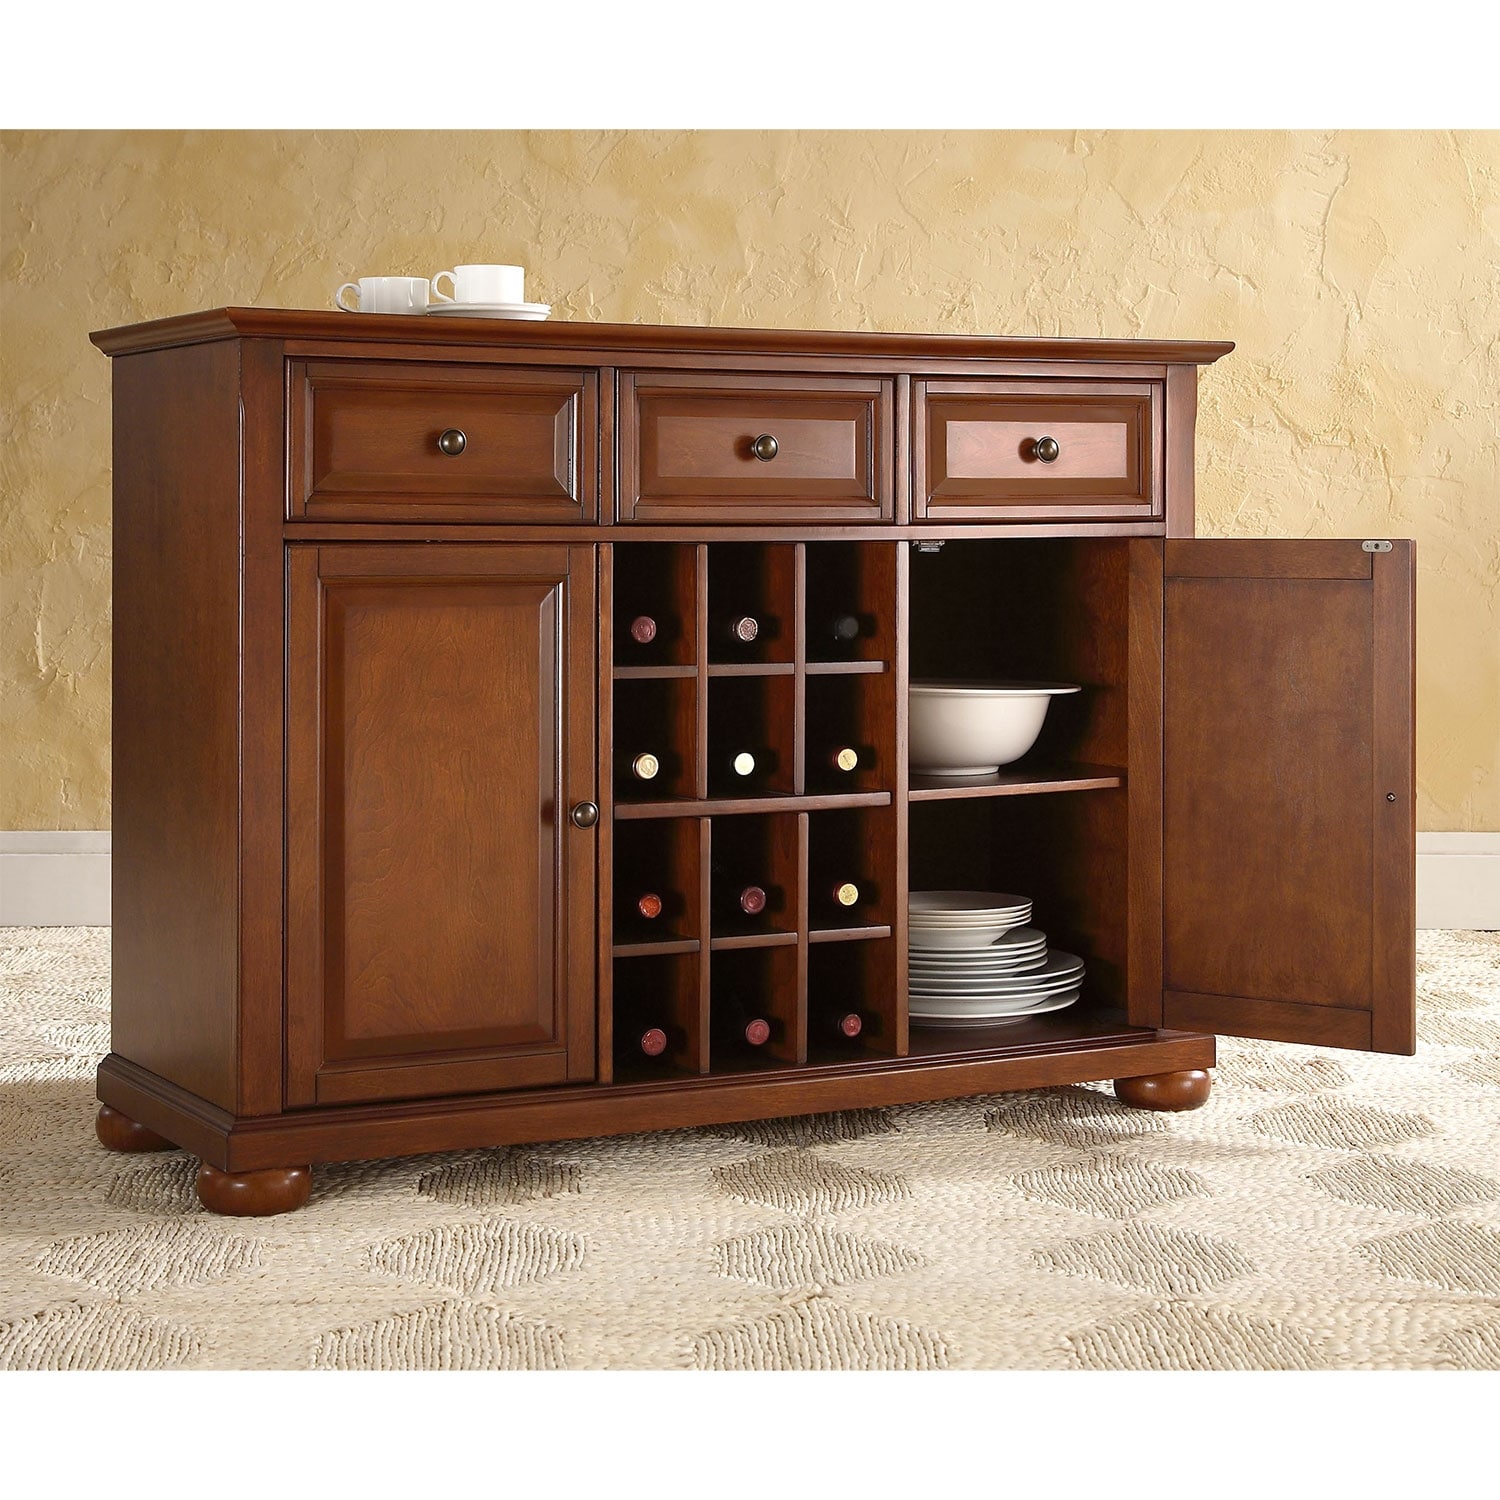 Dining Room Storage Cabinets | Value City Furniture